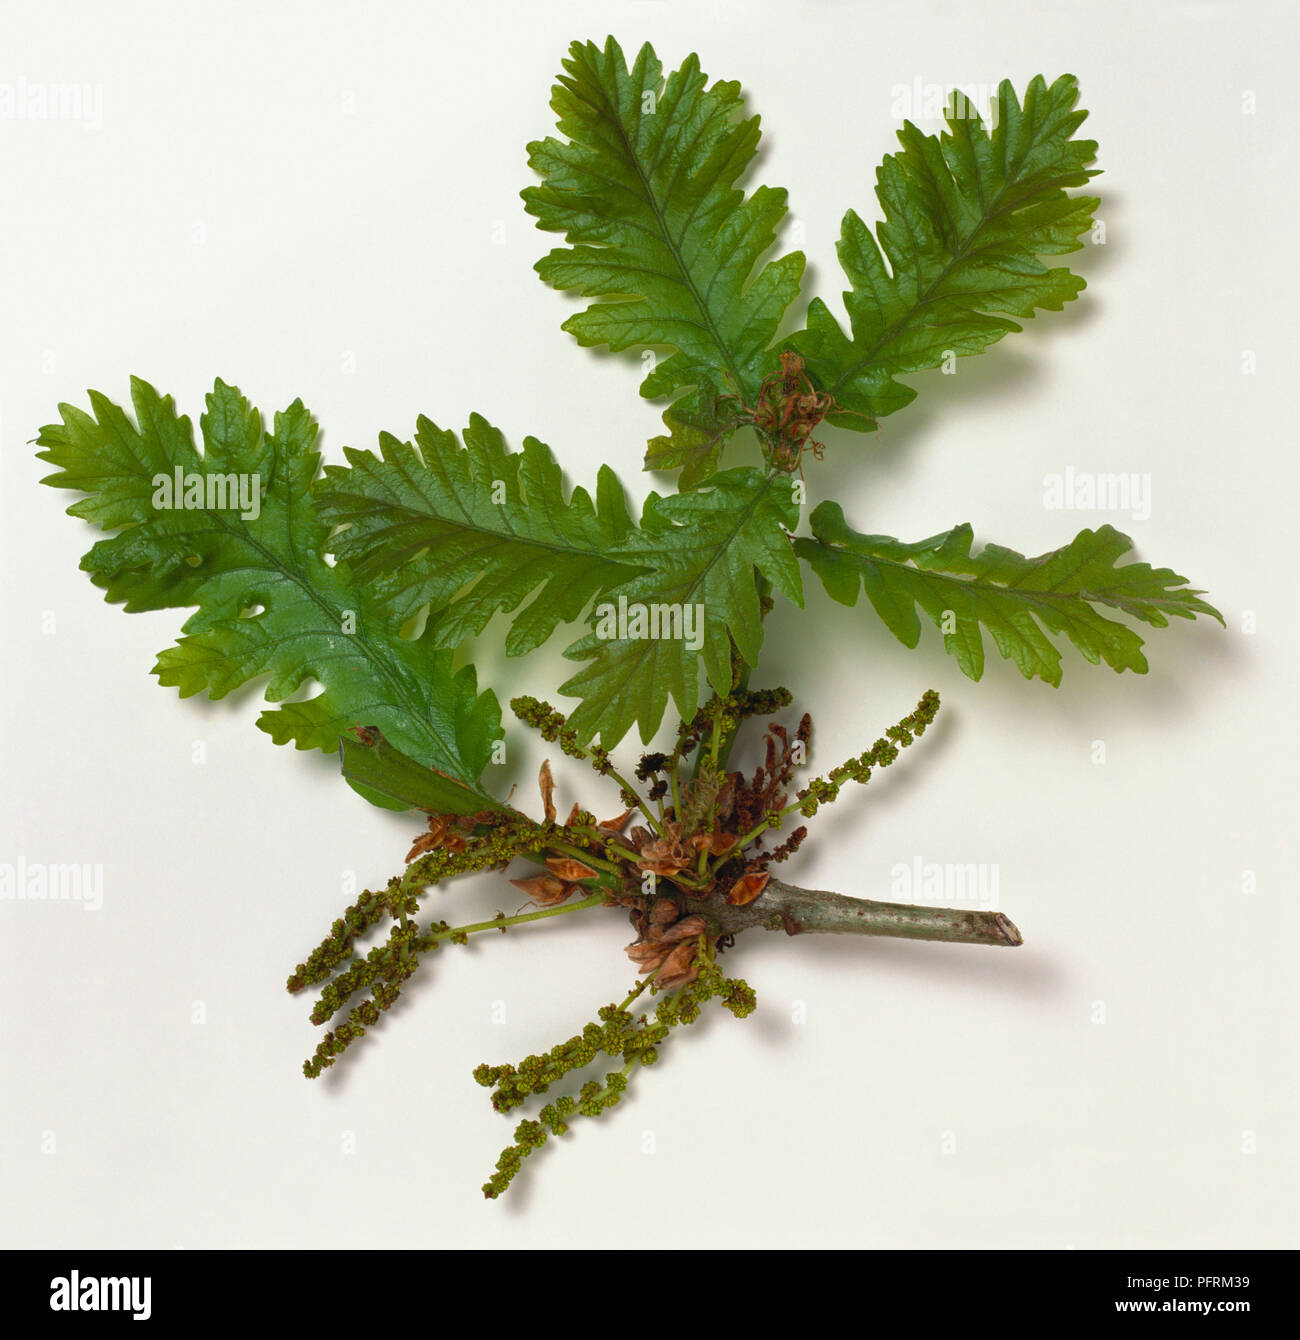 Quercus frainetto 'Hungarian Crown' (Hungarian oak), stem with leaves Stock Photo